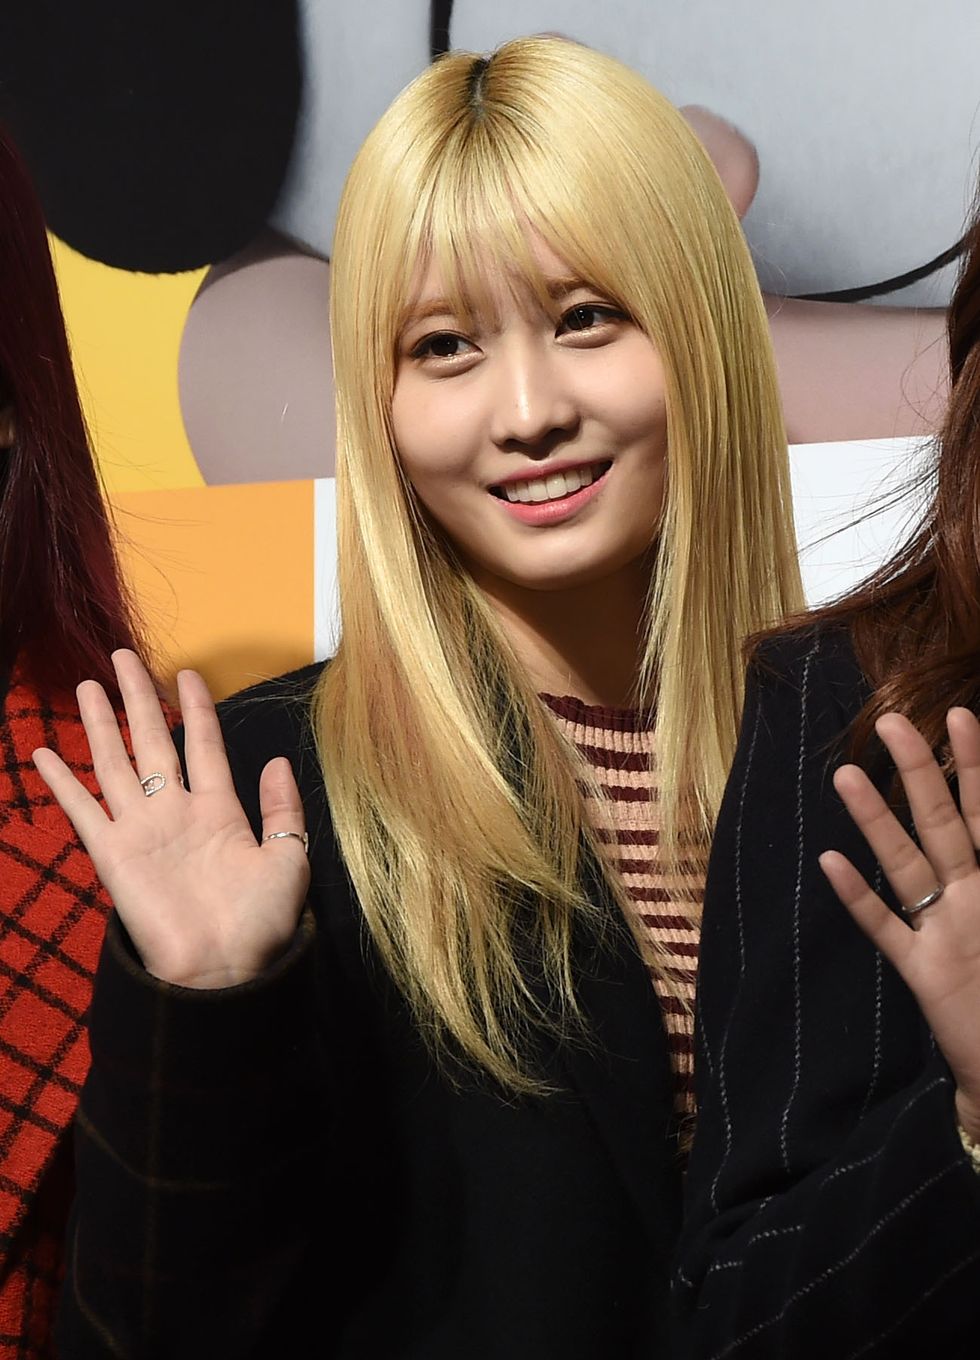 momo of twice attends the premiere of the movie the peanuts movie on december 16, 2015 in seoul, south korea 2015 12 16